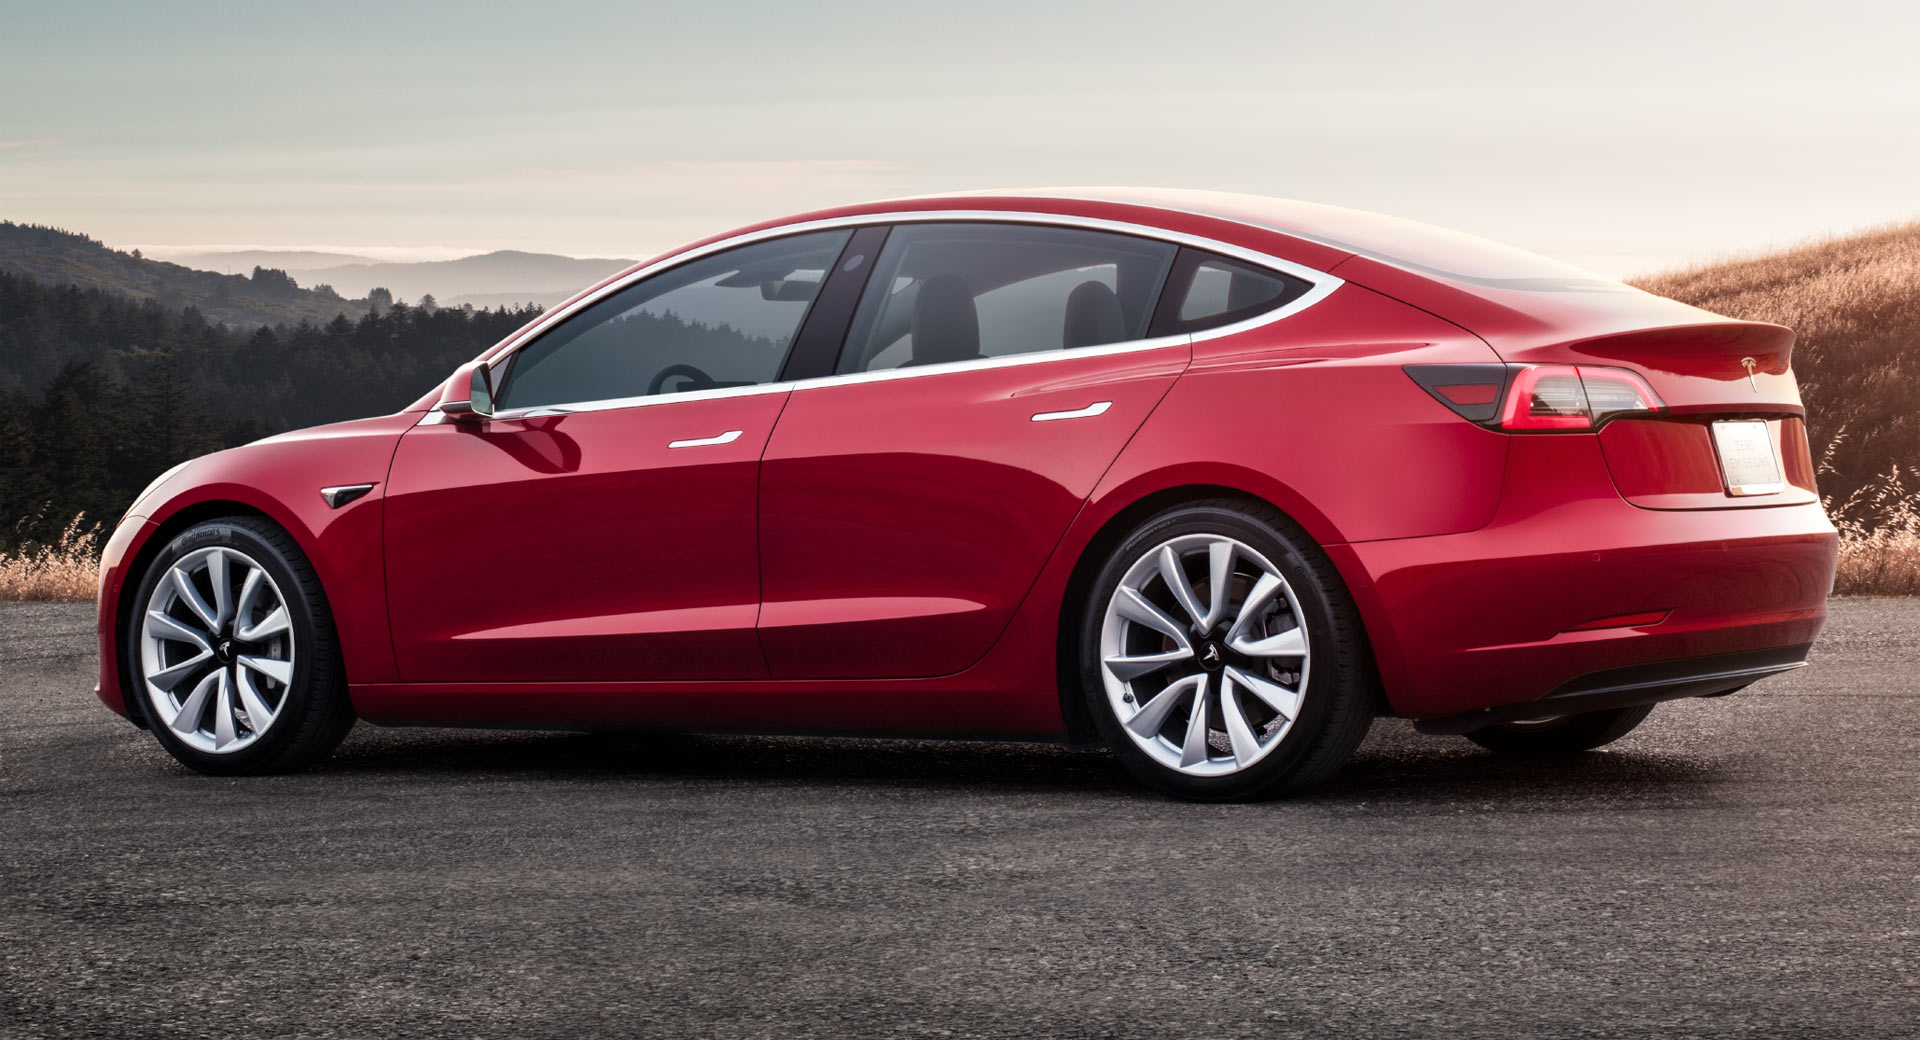 Three Of The Fastest-Selling Used Cars In The U.S. Are Teslas